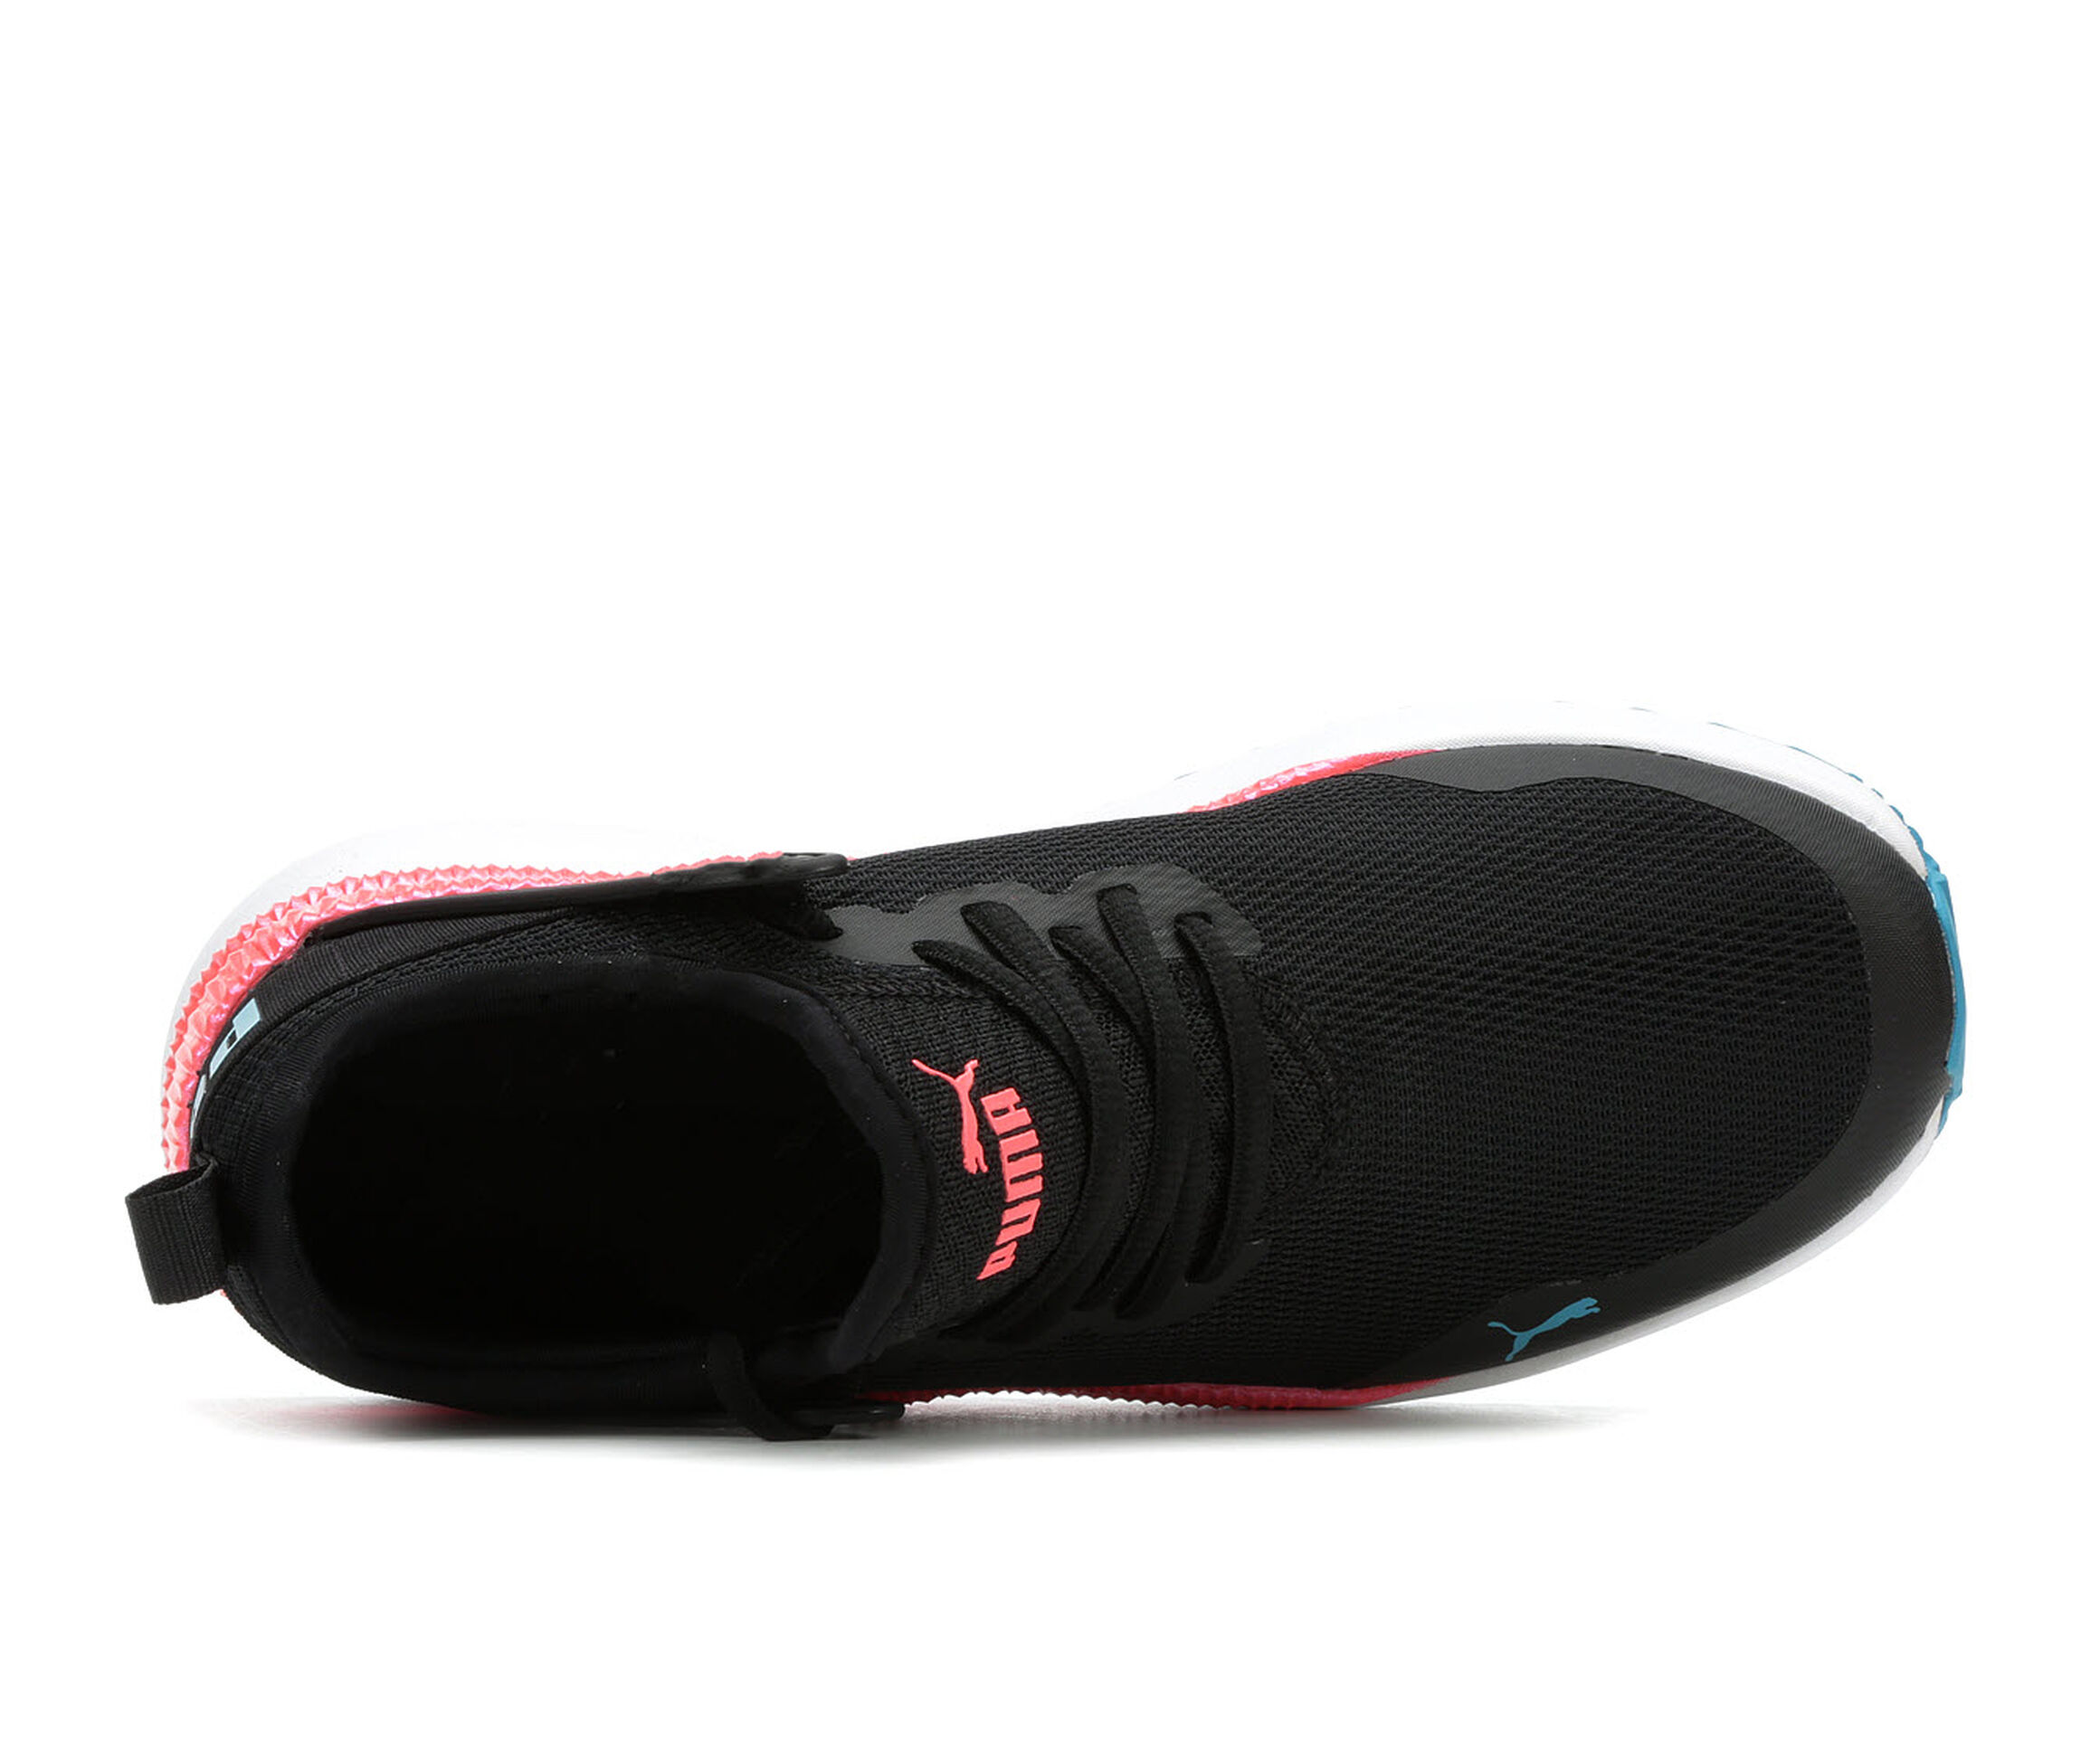 puma pacer next cage pink